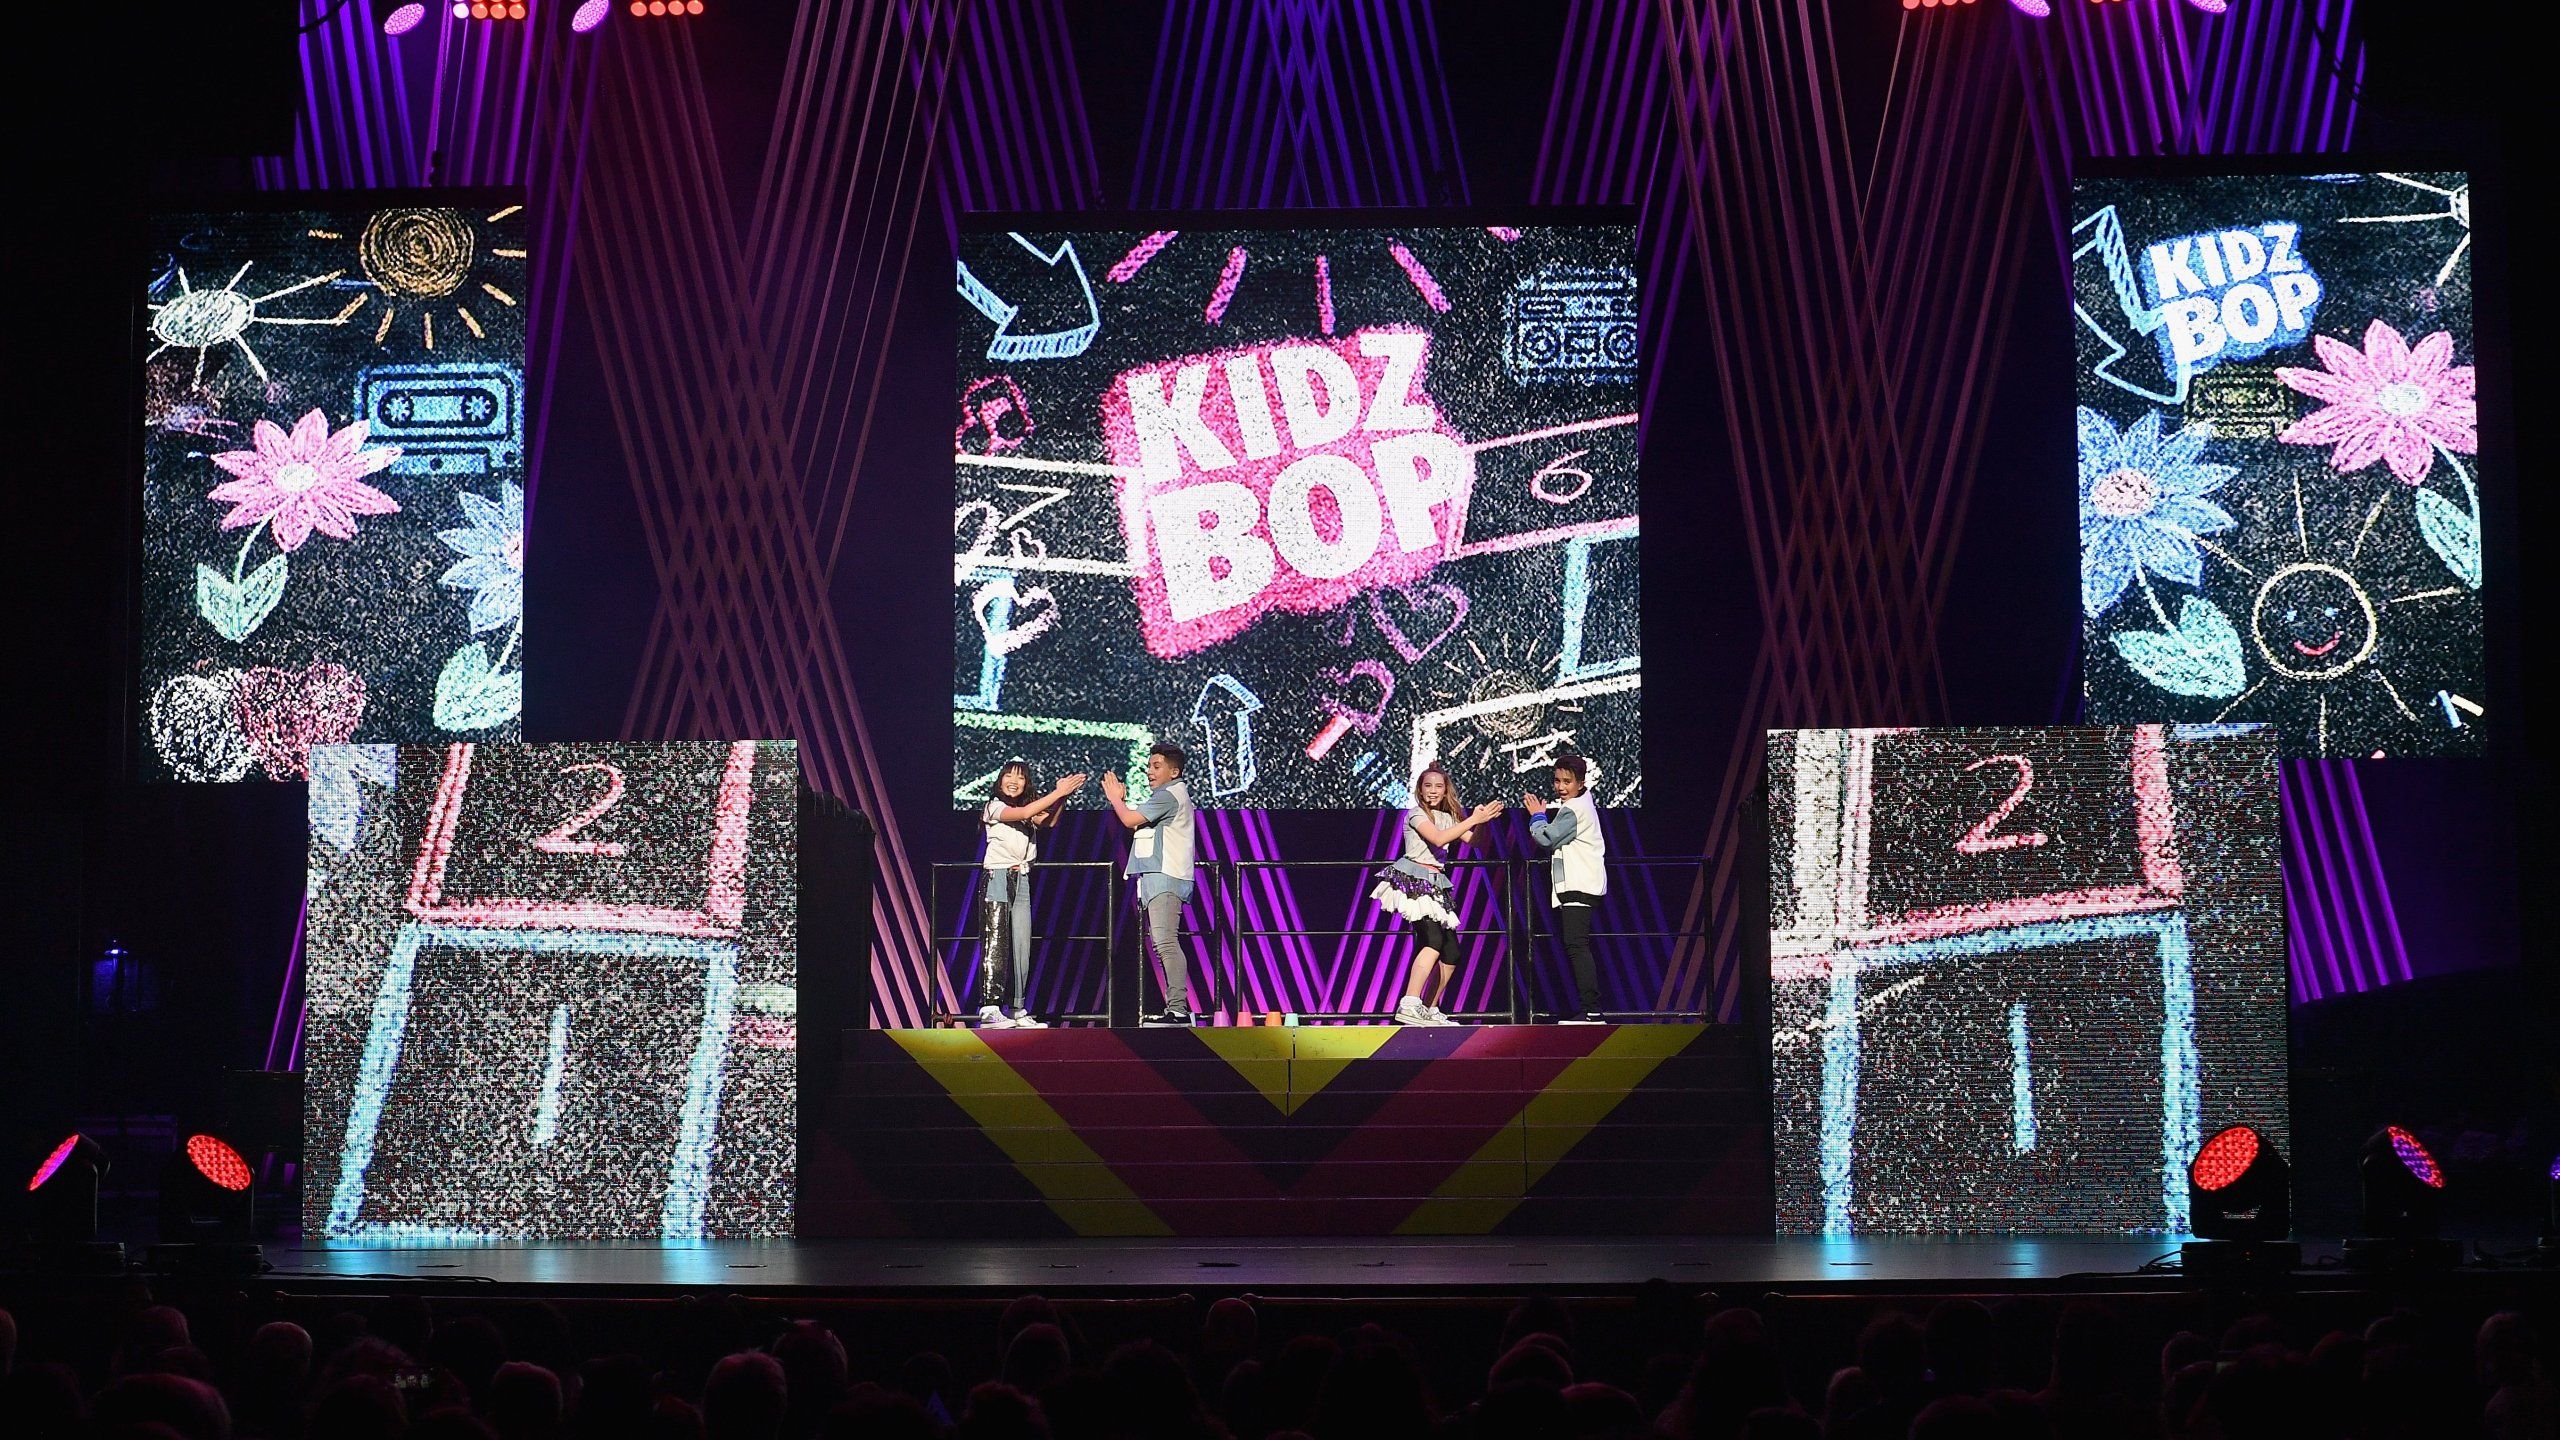 KIDZ BOP' concert coming to Indianapolis as part of new 2020 tour